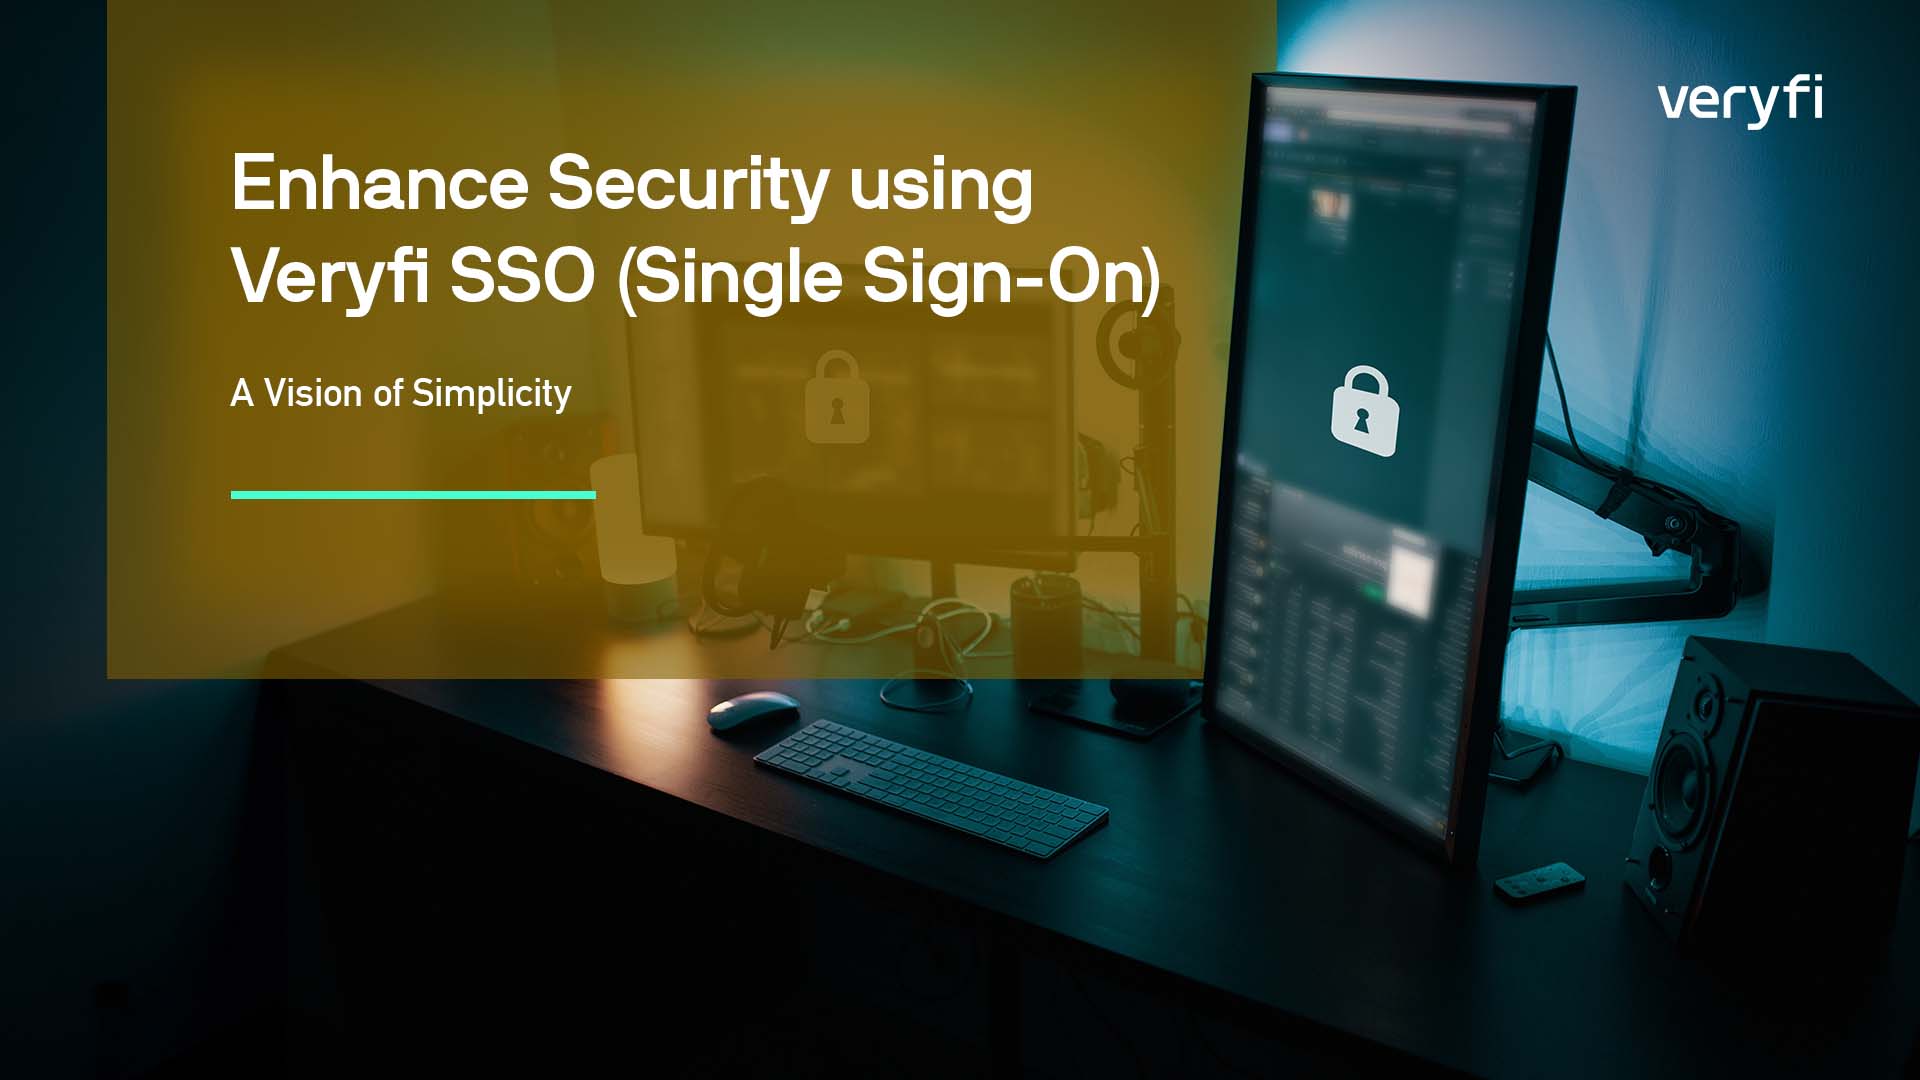 Veryfi SSO enhances security and adds layered protection to existing security protocols